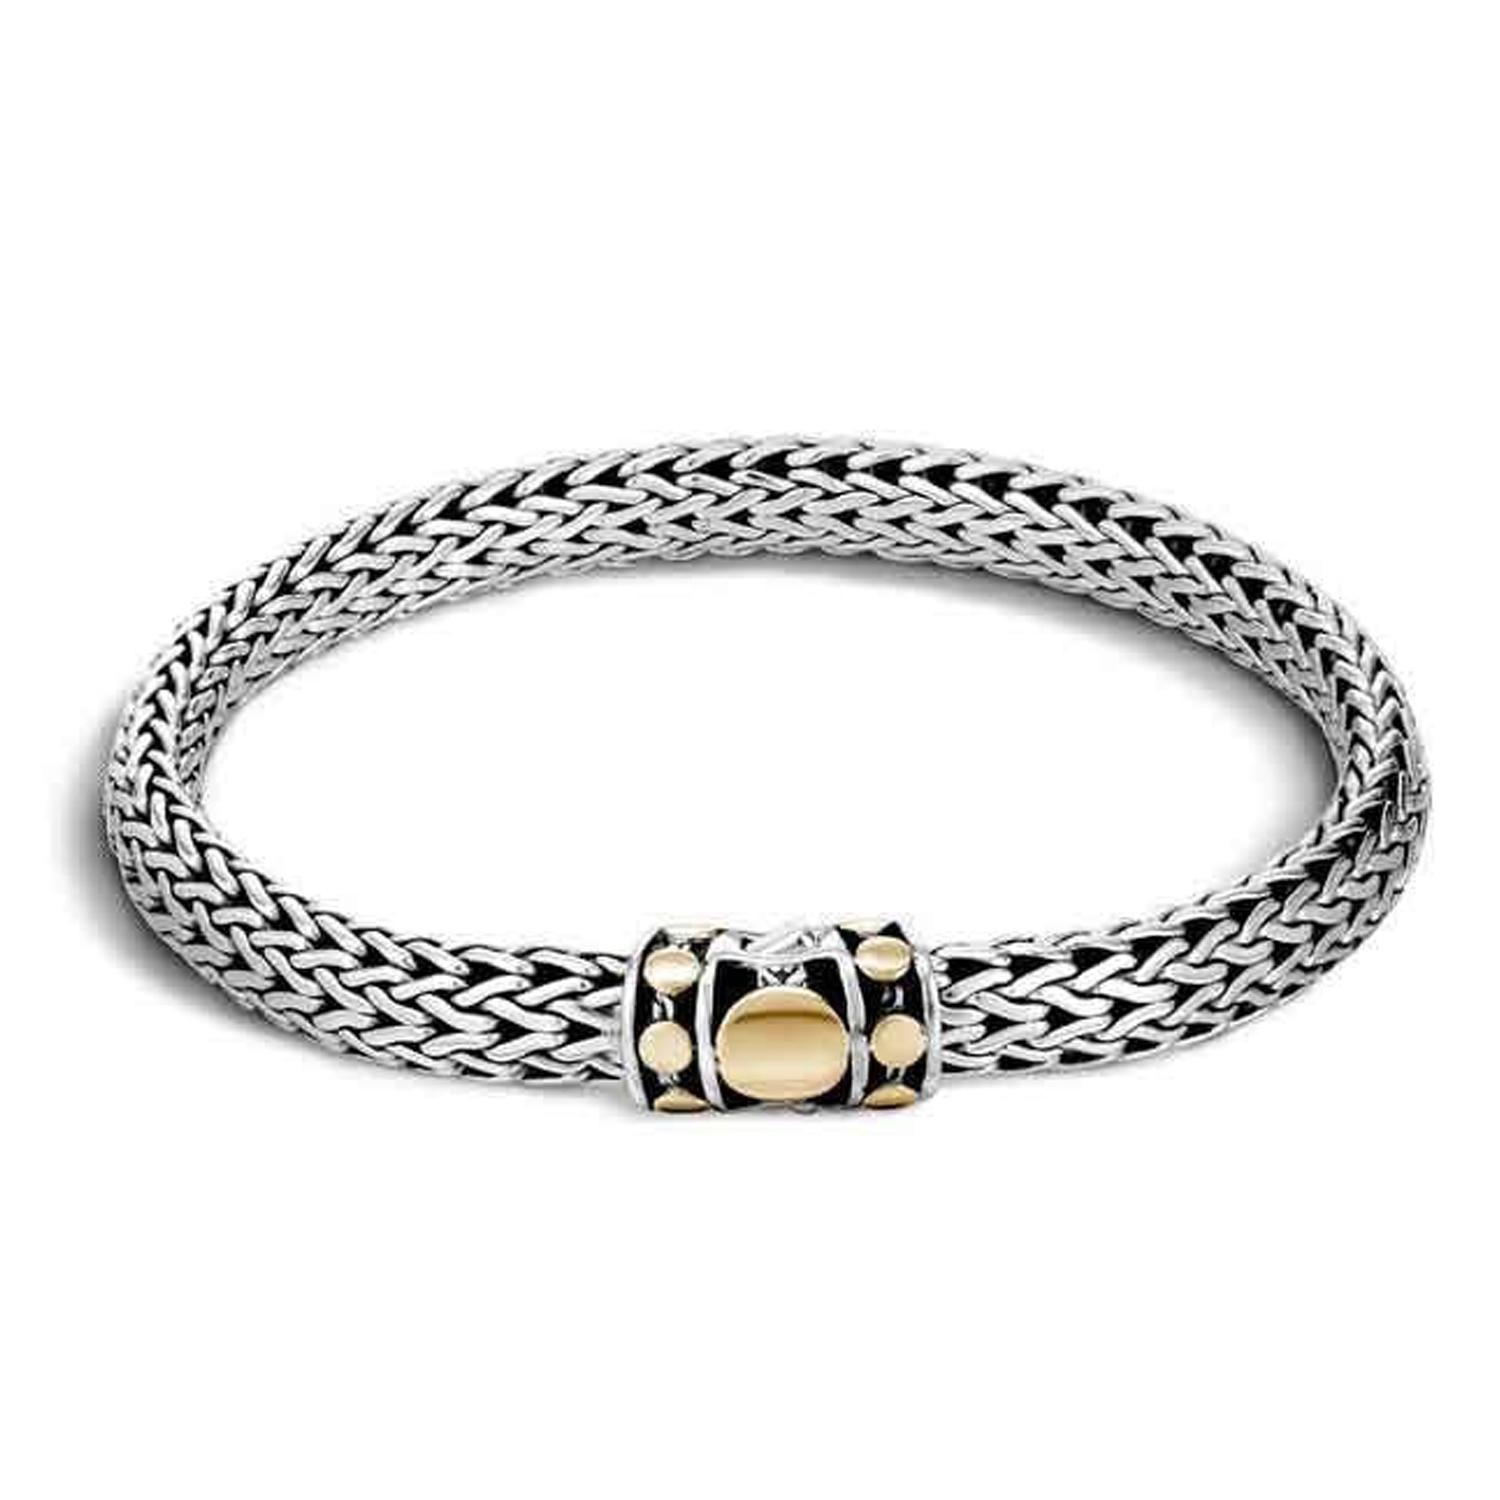 Take a trip back to the Jazz Age with this John Hardy bracelet from the designer's Dot collection! Crafted in sterling silver and 18kt yellow gold, the woven chain piece features a box-clasp closure embellished with flattened smooth balls of